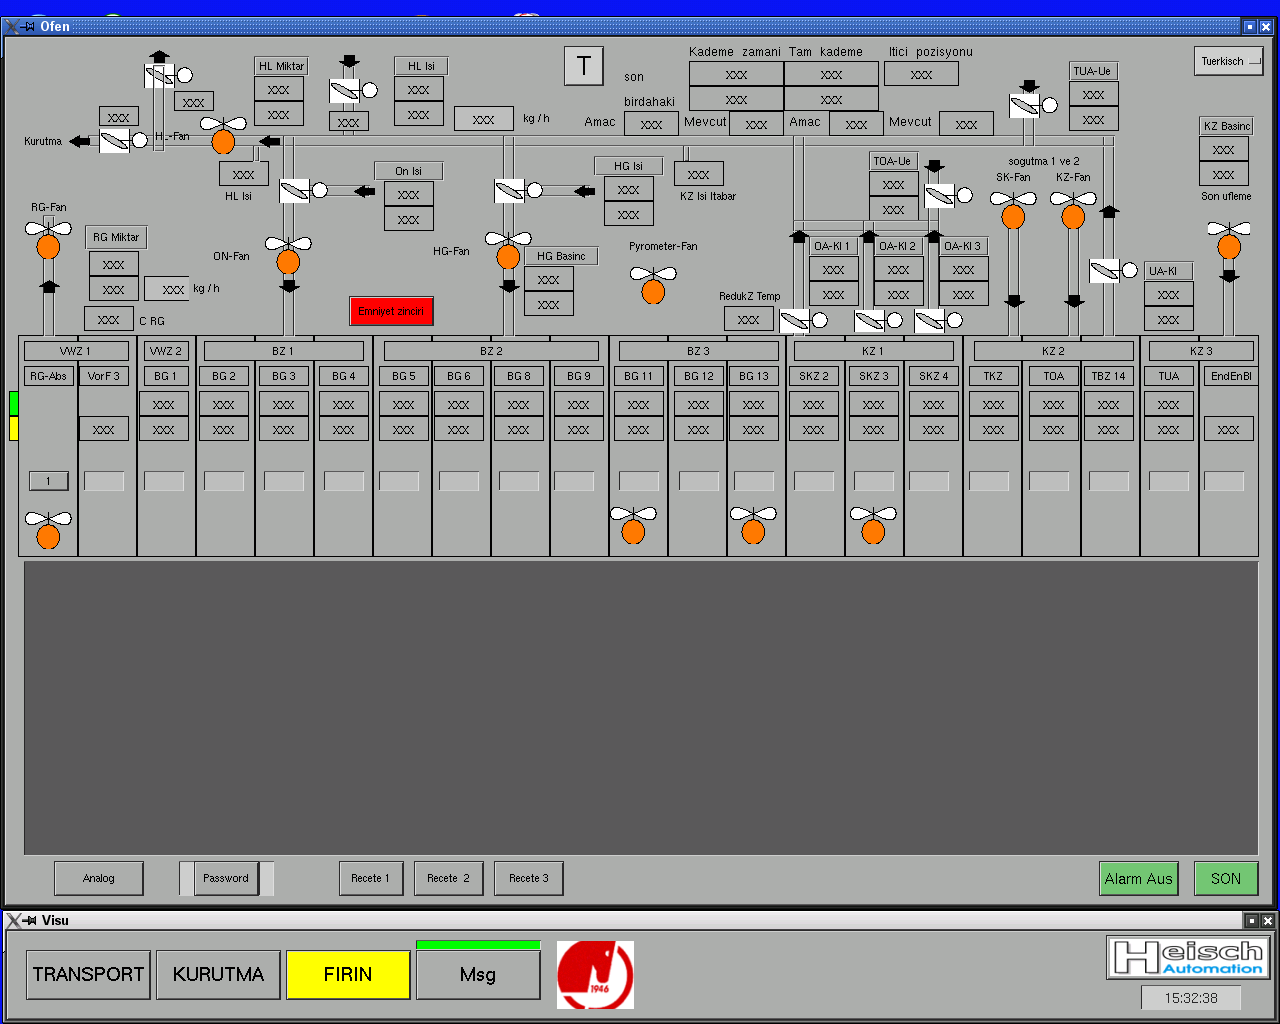 Screenshot from program for controlling tile plant